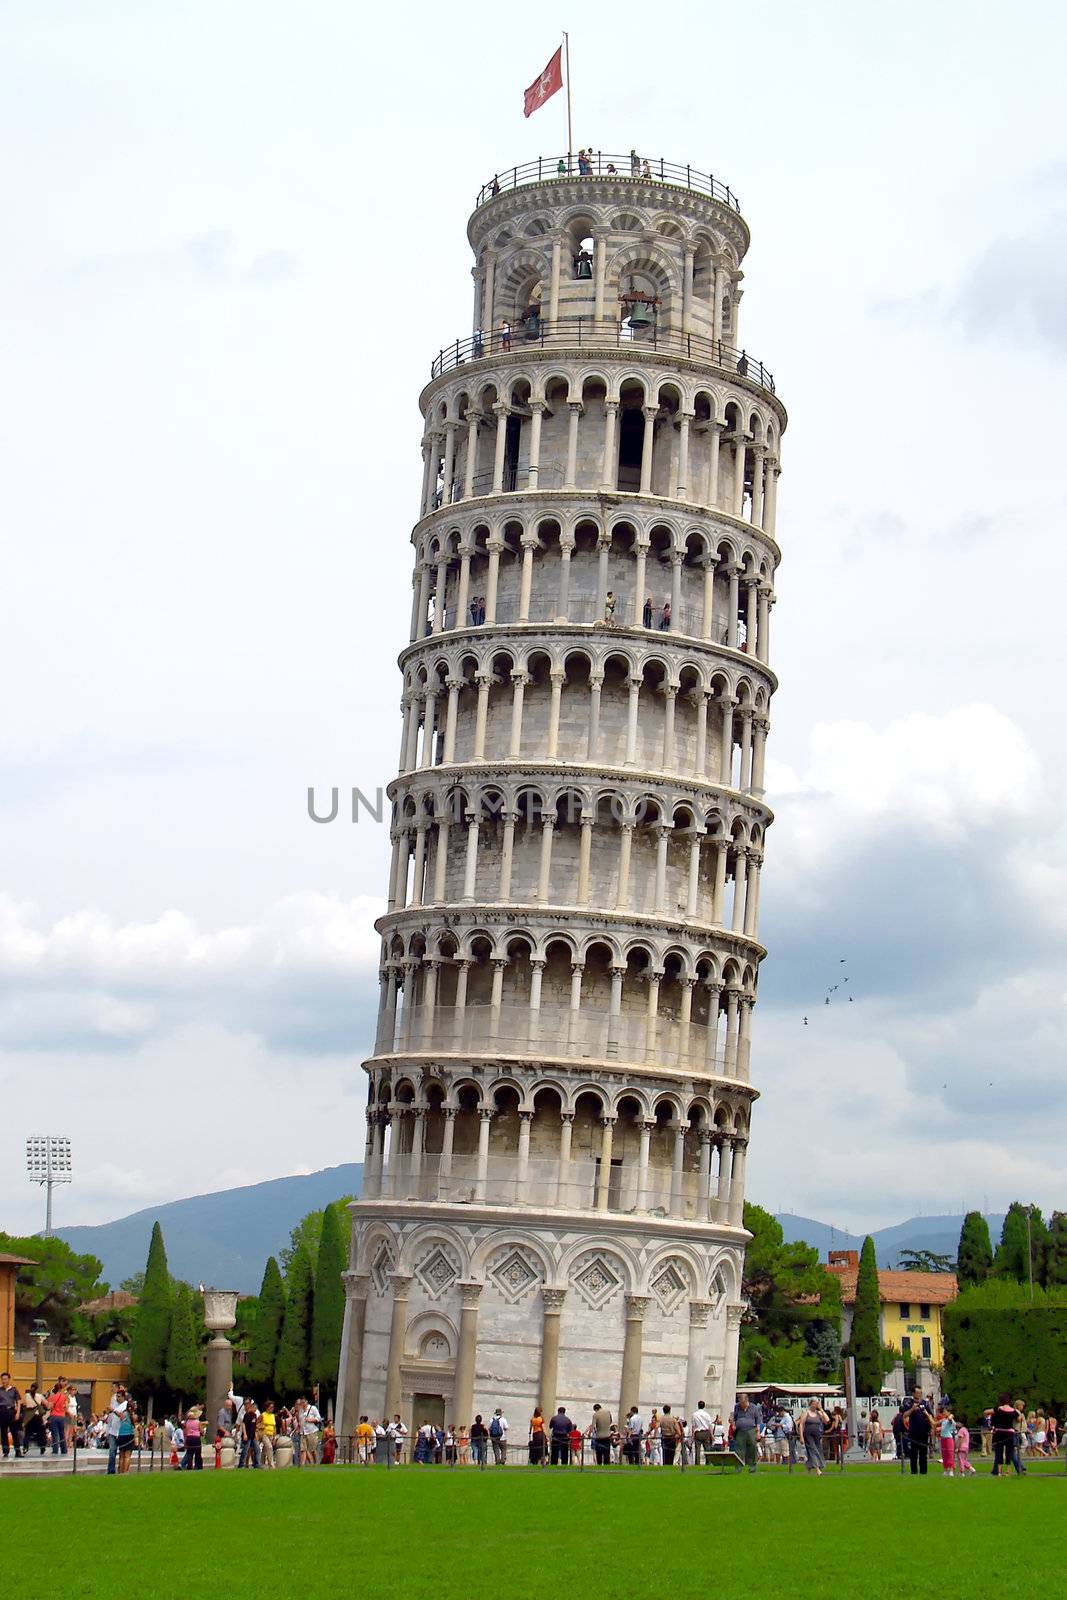 Pisa leaning tower by gary718